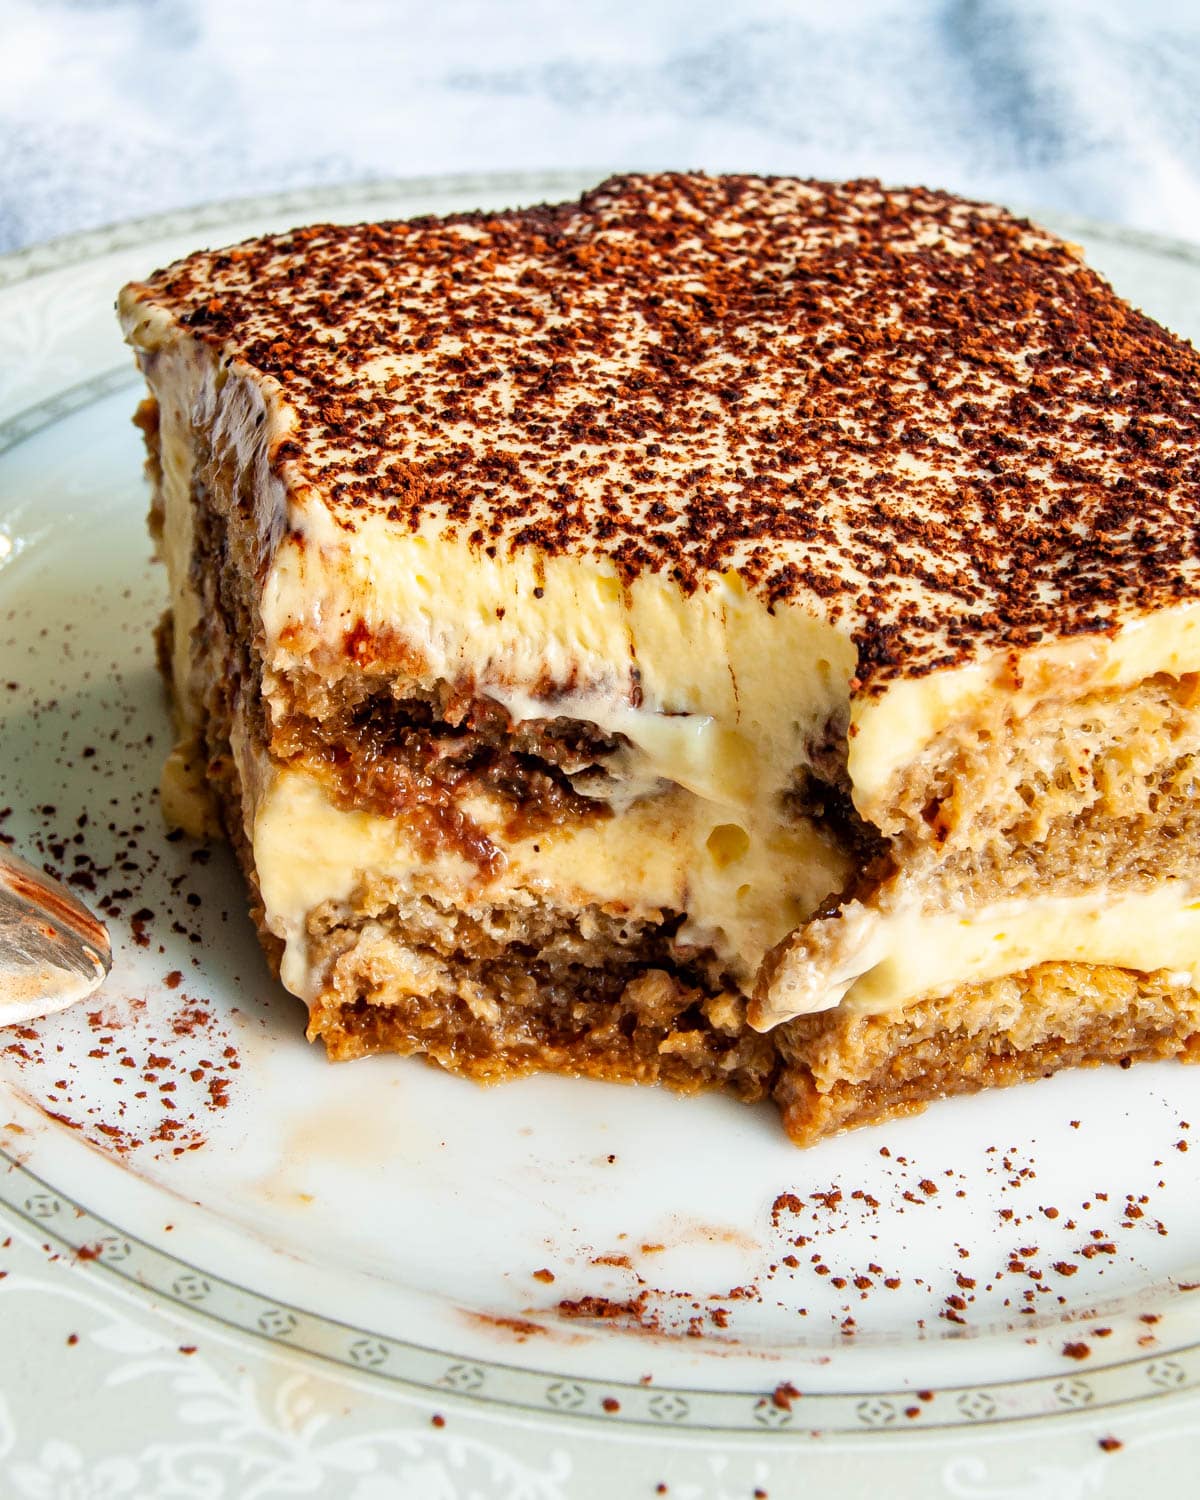 slice of tiramisu on a plate with bite taken out of it